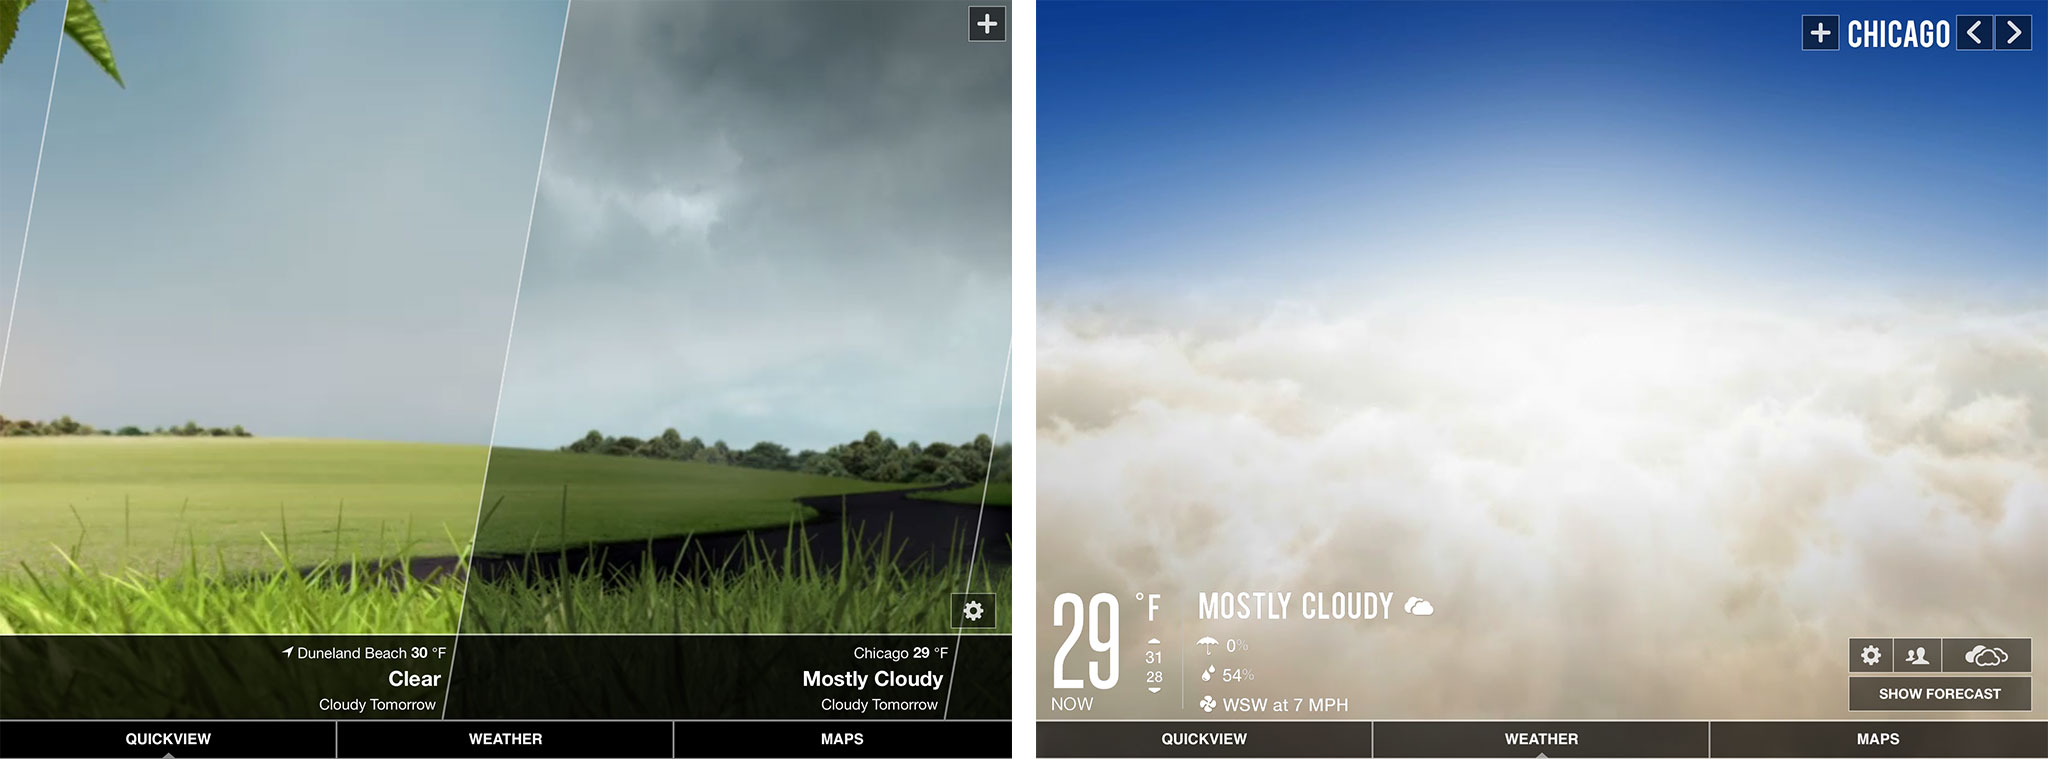 Best weather apps for iPad: Clear Day